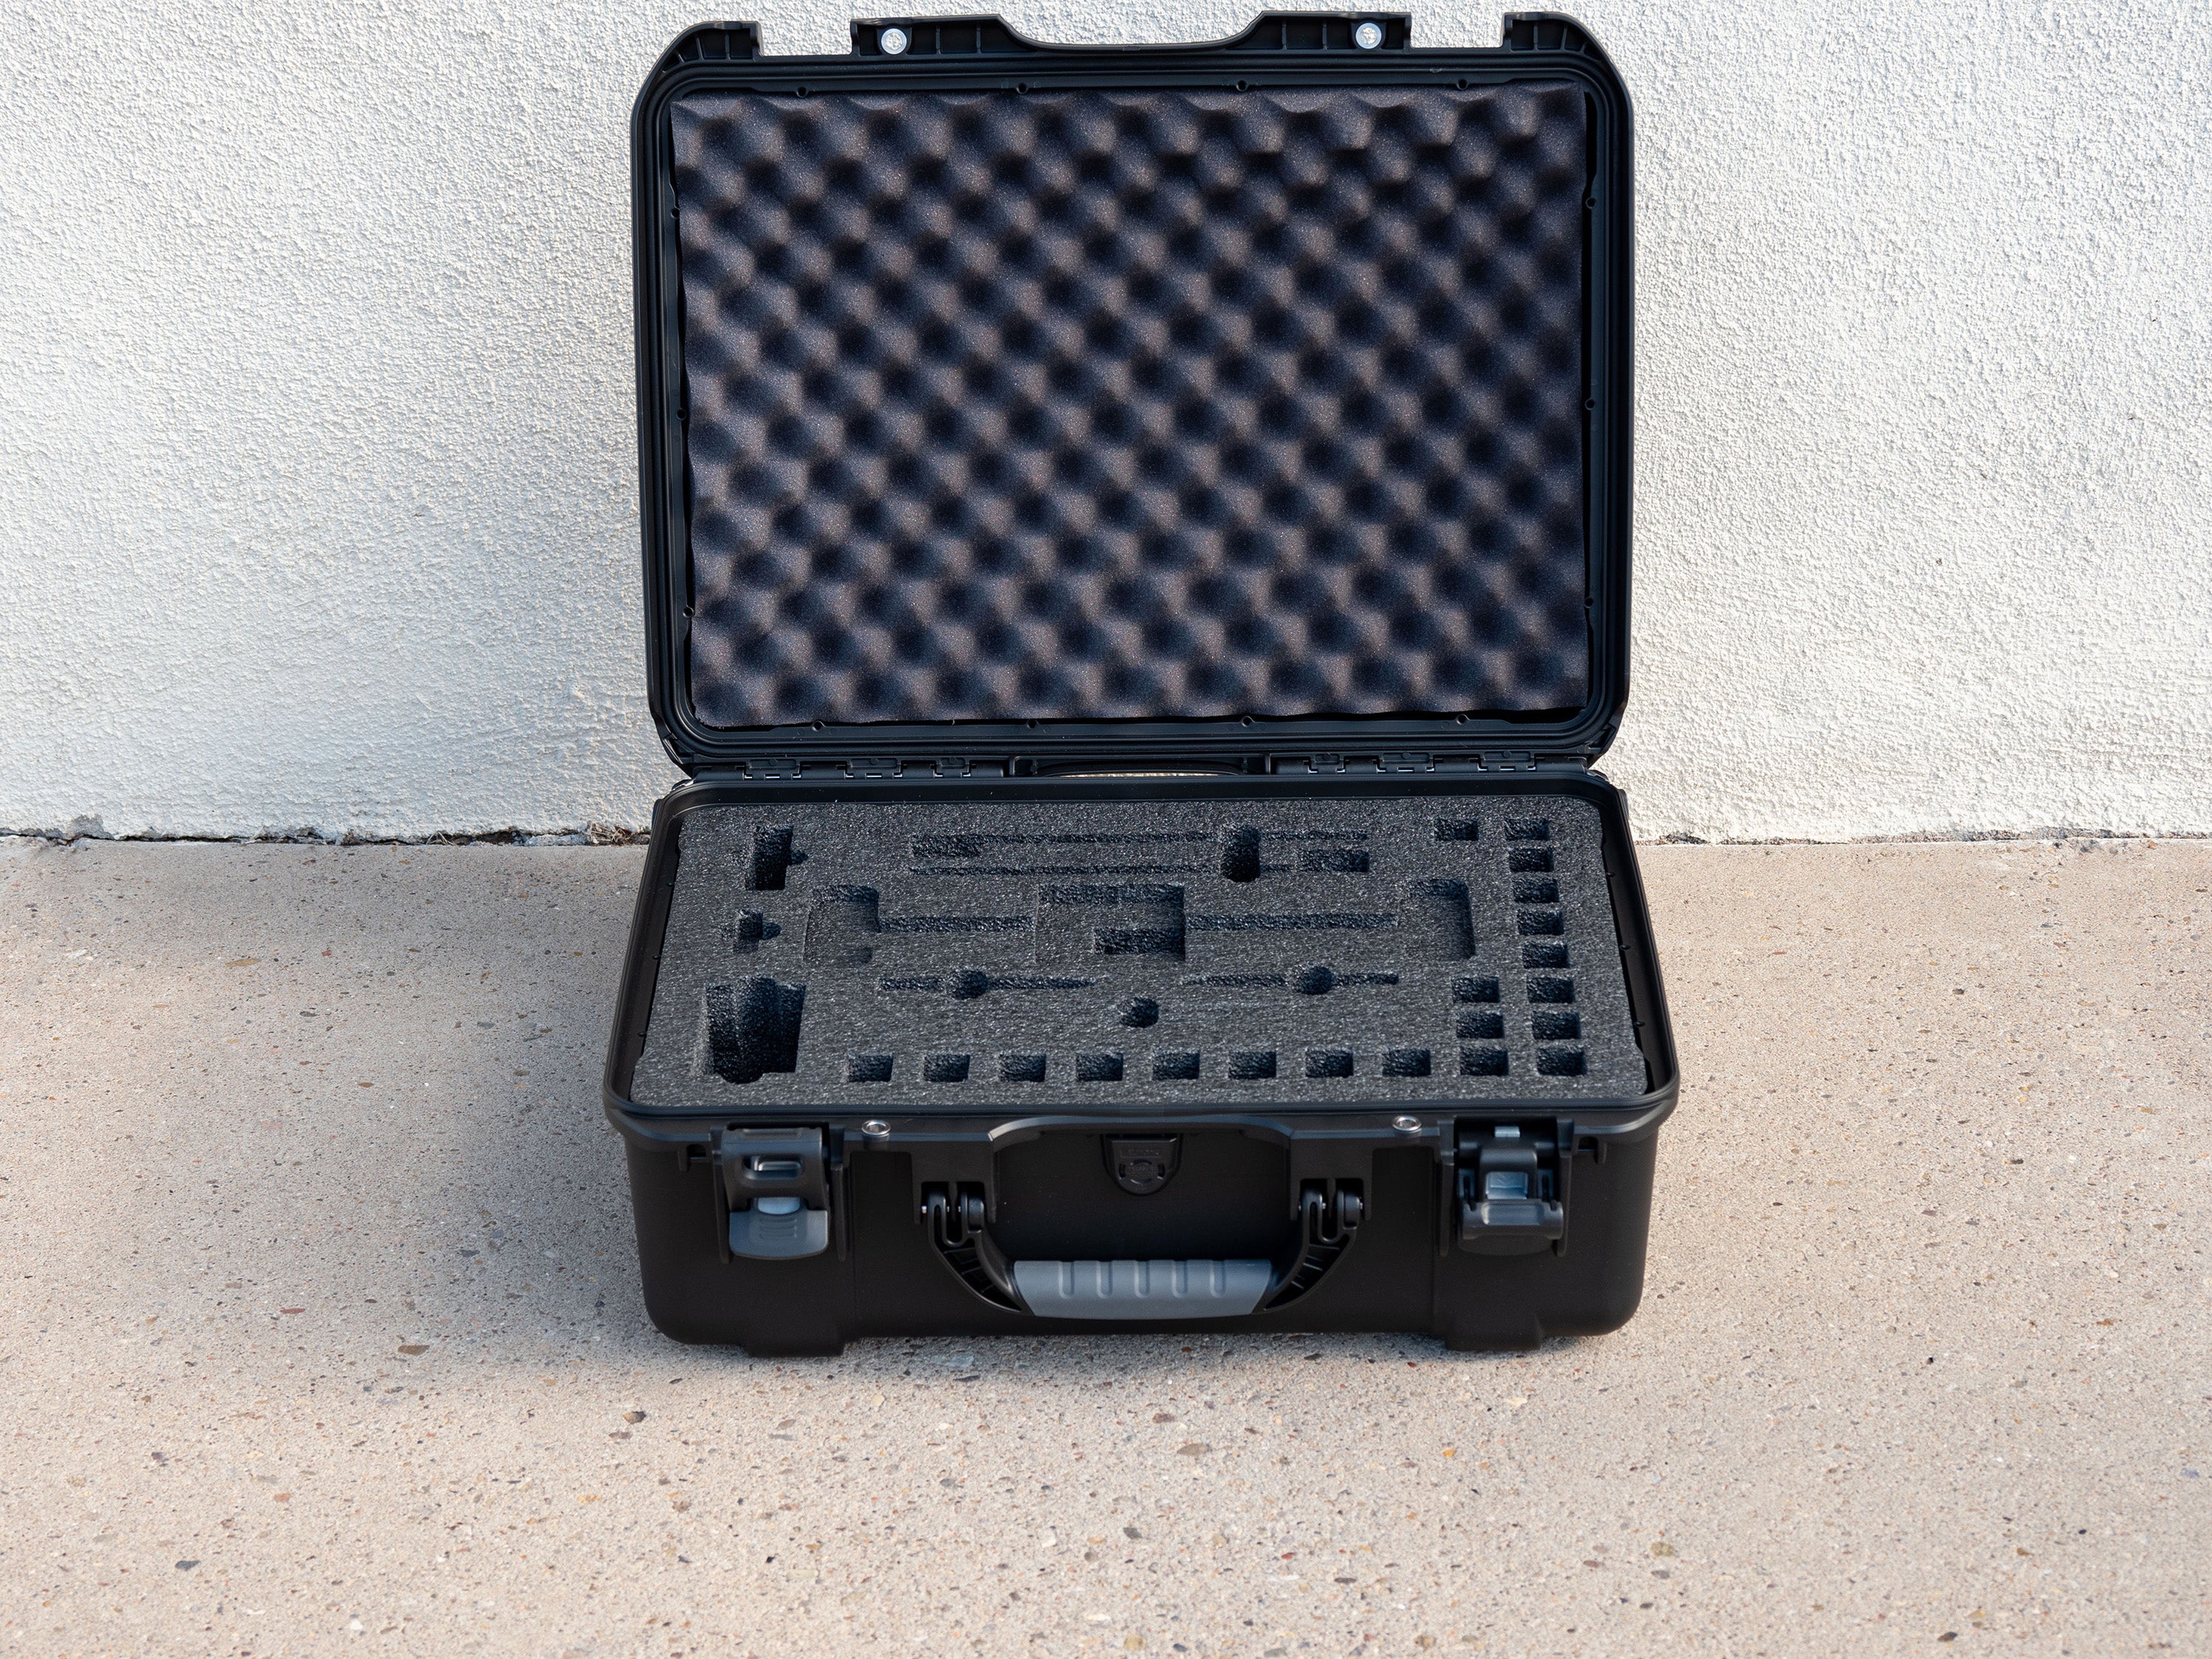 Pro-Pack II with Quartz Stone Base and Hard Carrying Case